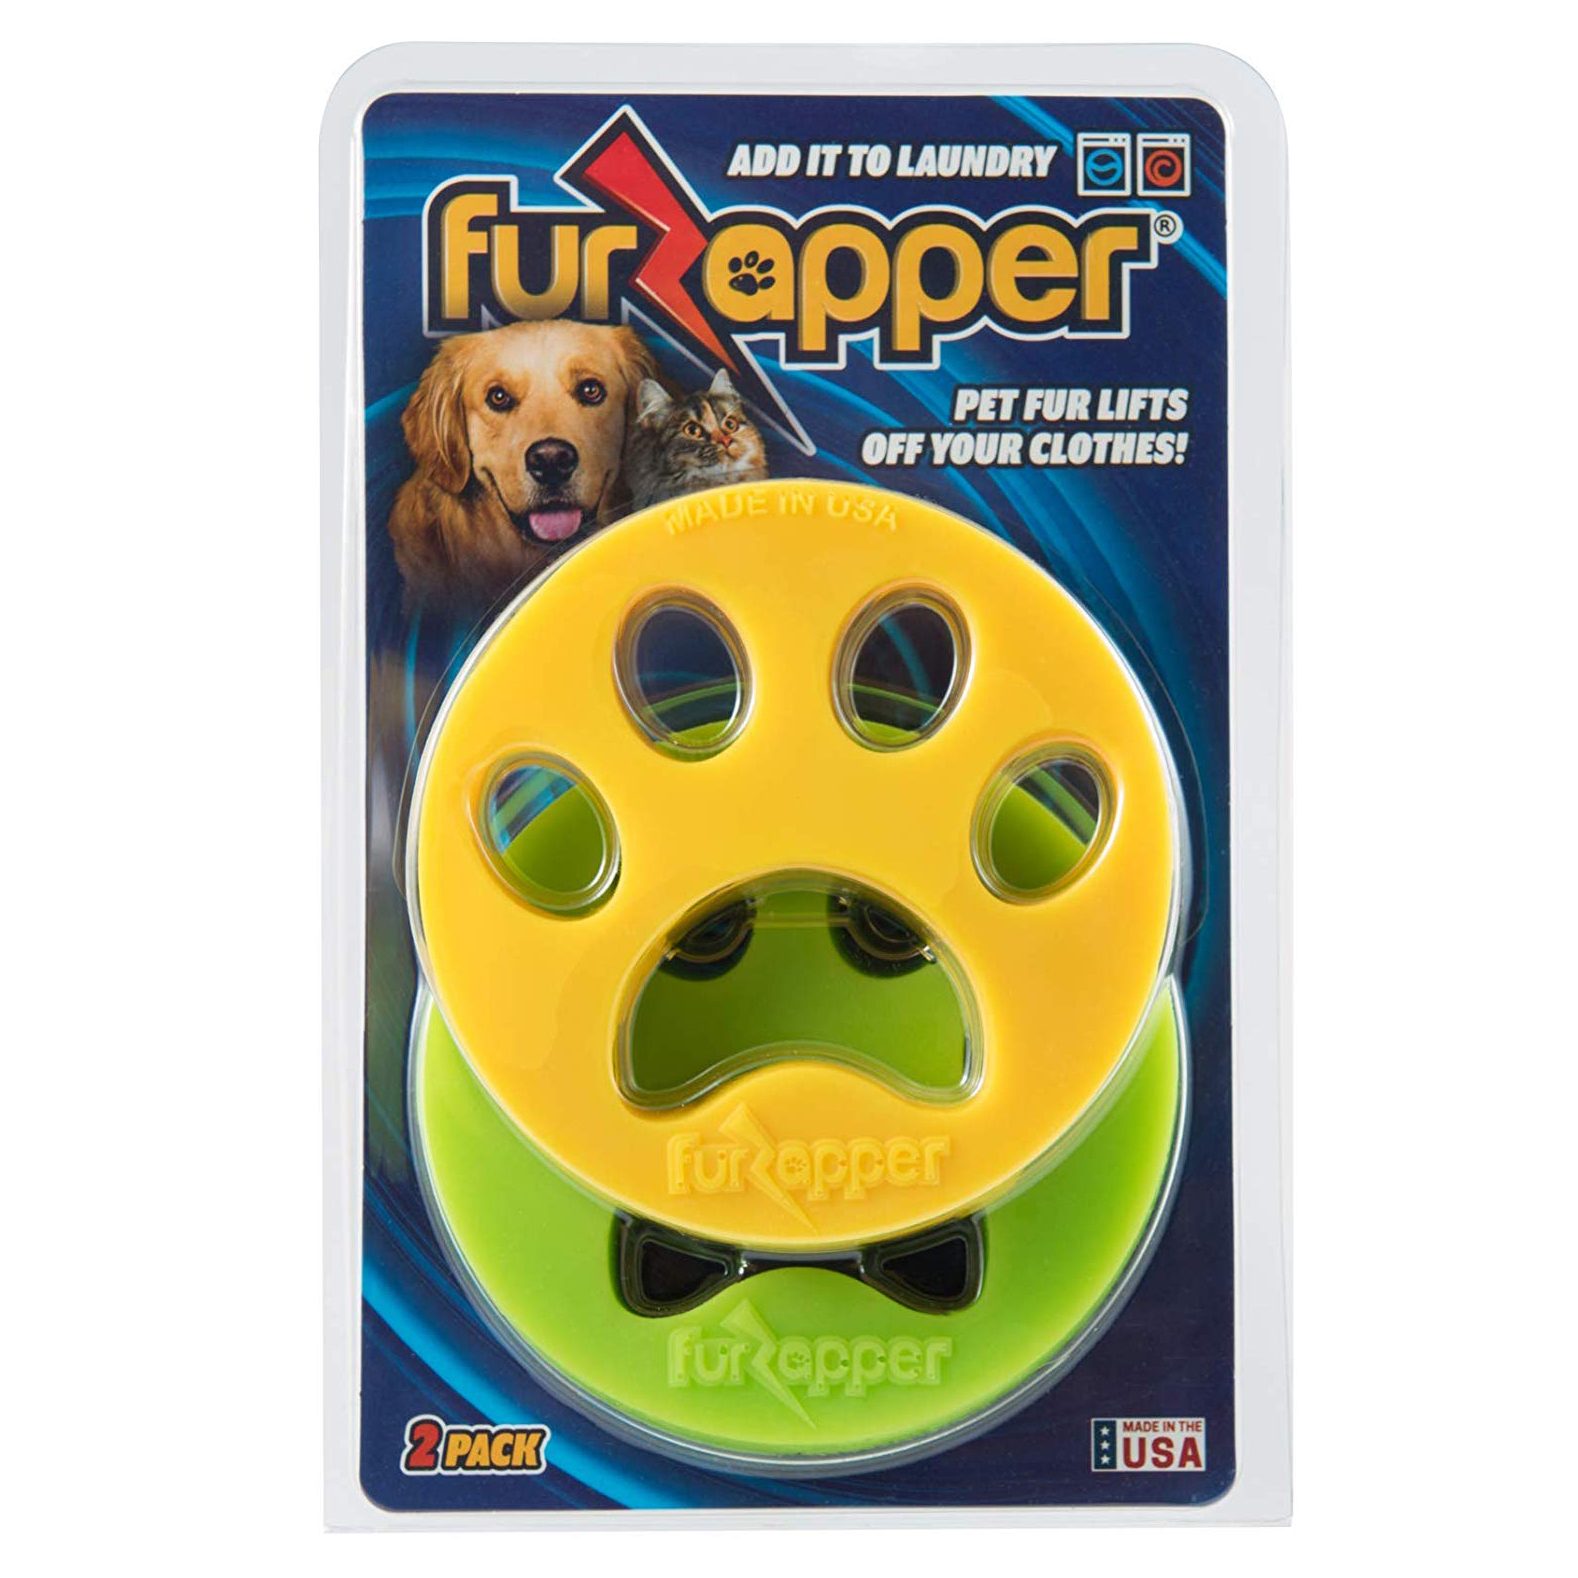 Pet Hair Remover Pet Supplies for Dogs and Pet Supplies for Cats Safari Pet Hair Roller Dog Supplies Cat Supplies